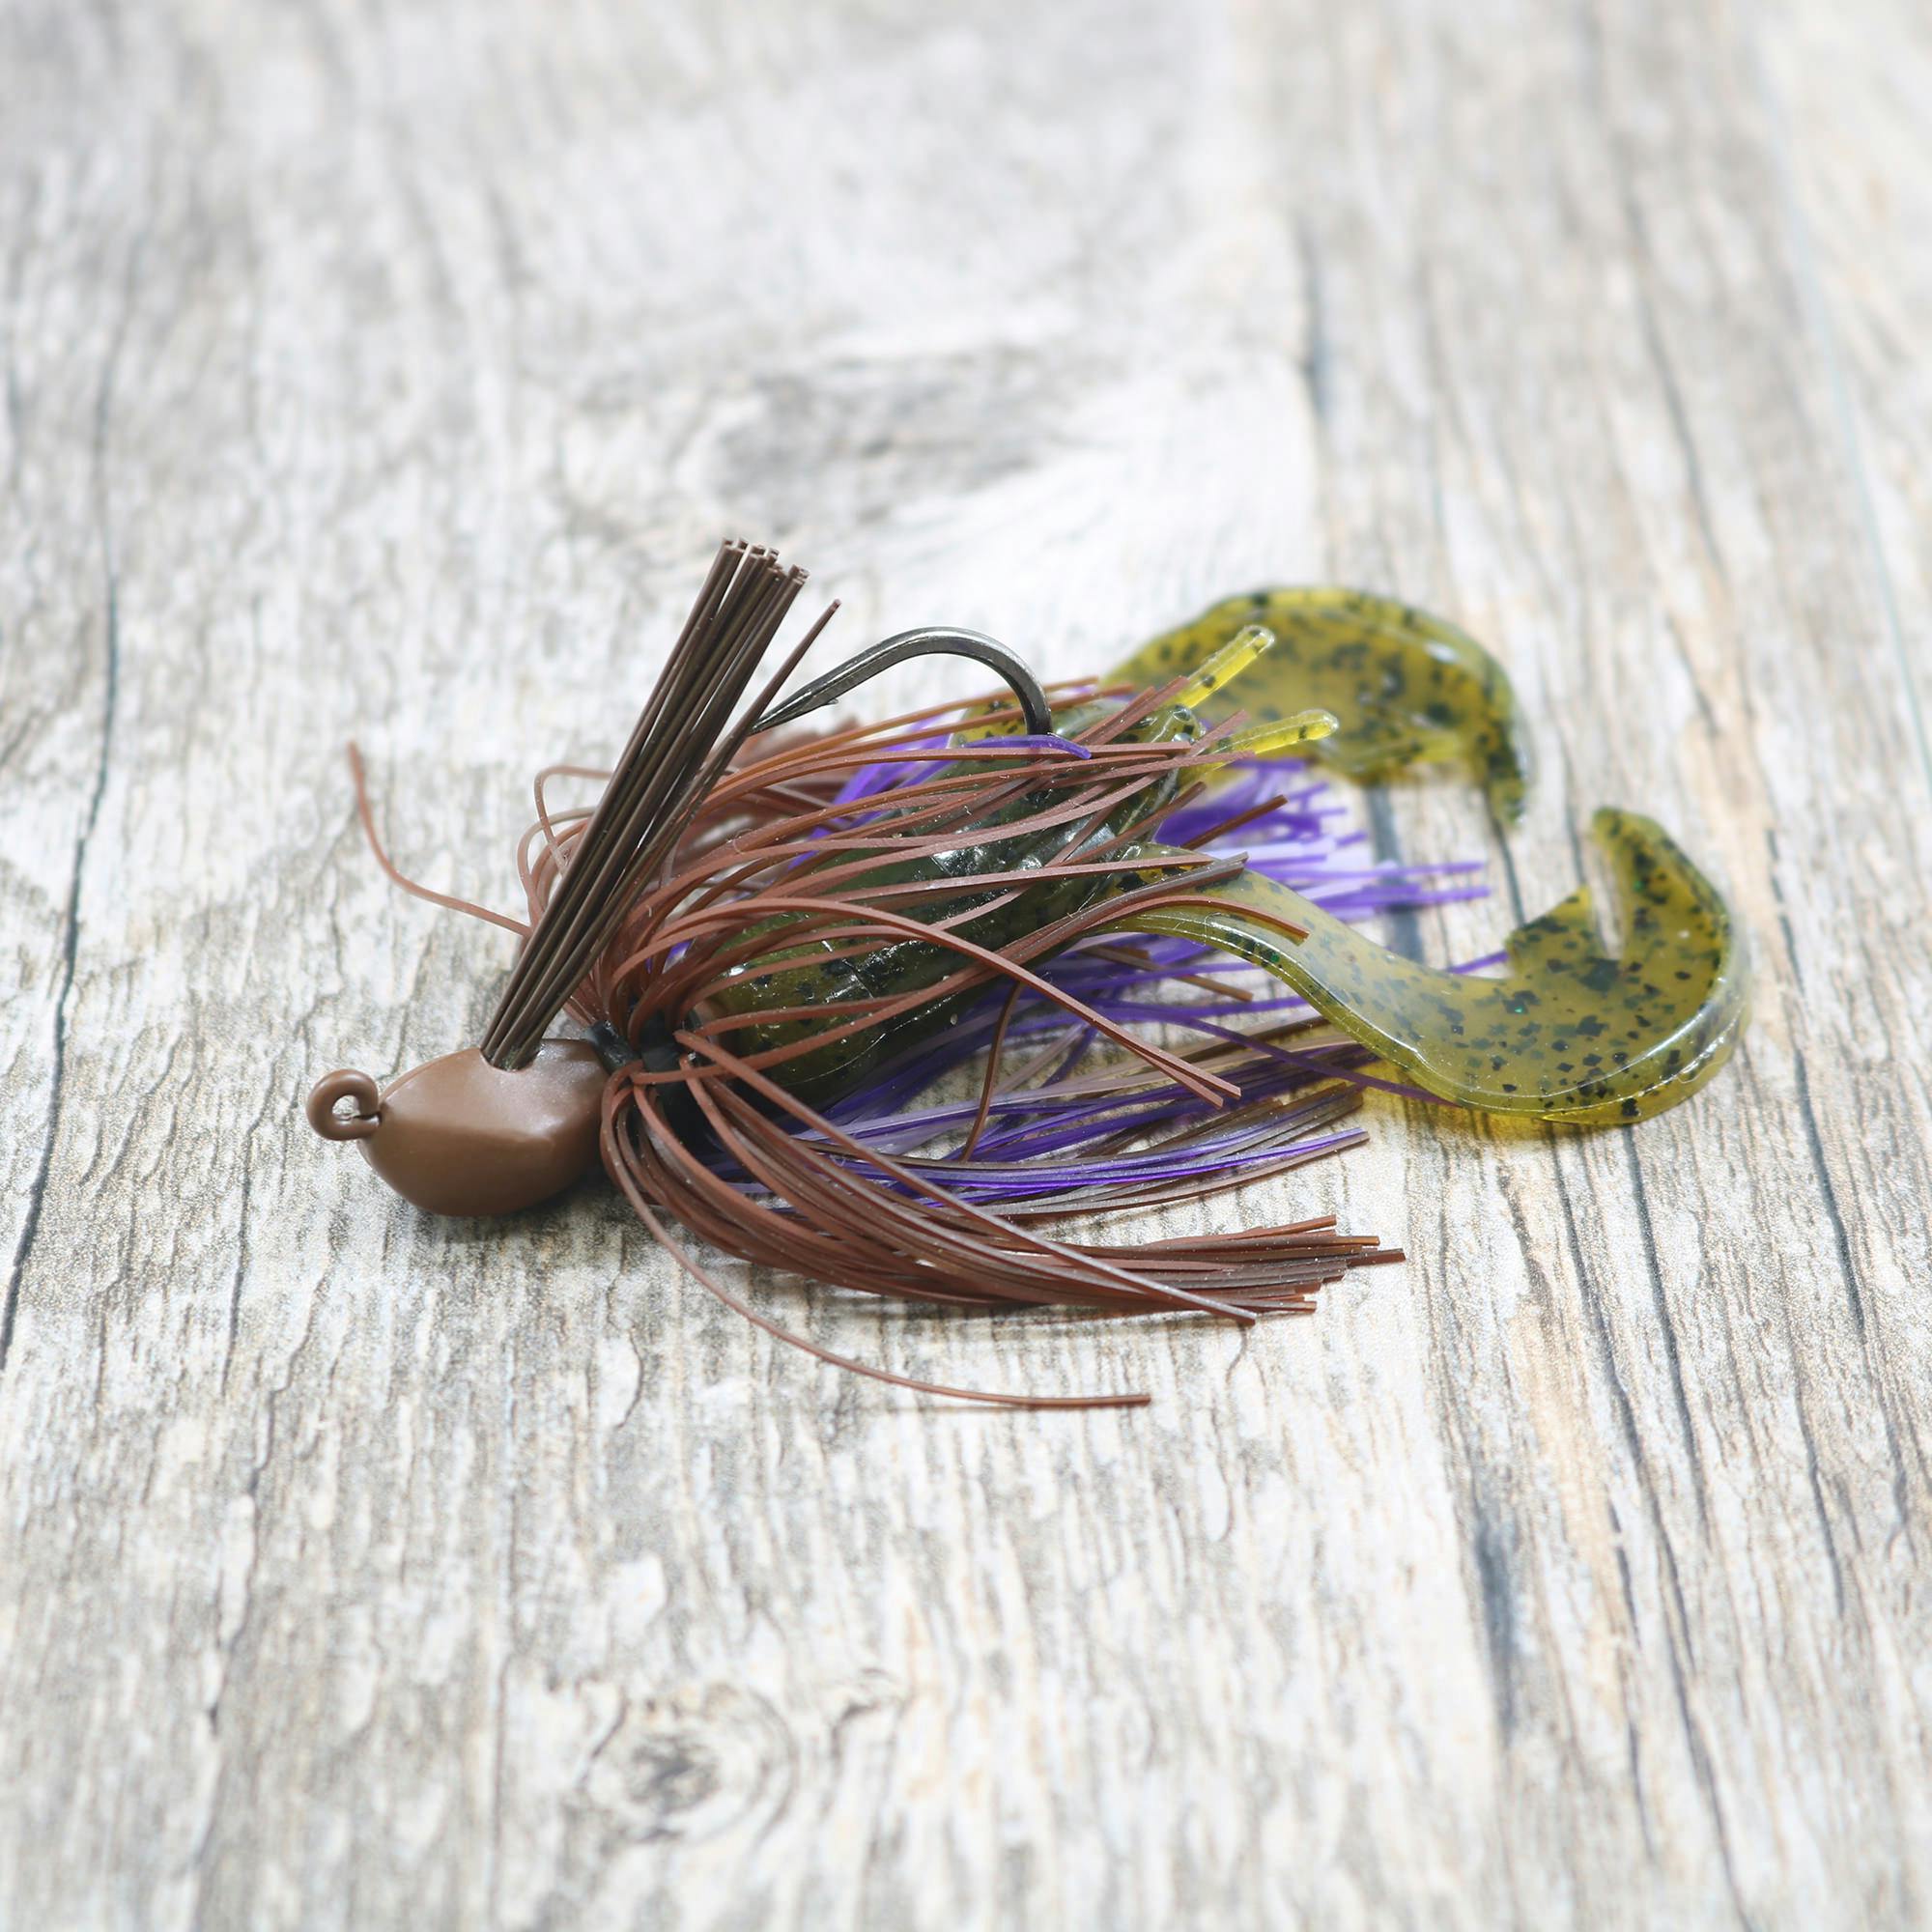 How To Pick The BEST JIG TRAILER for Bass 